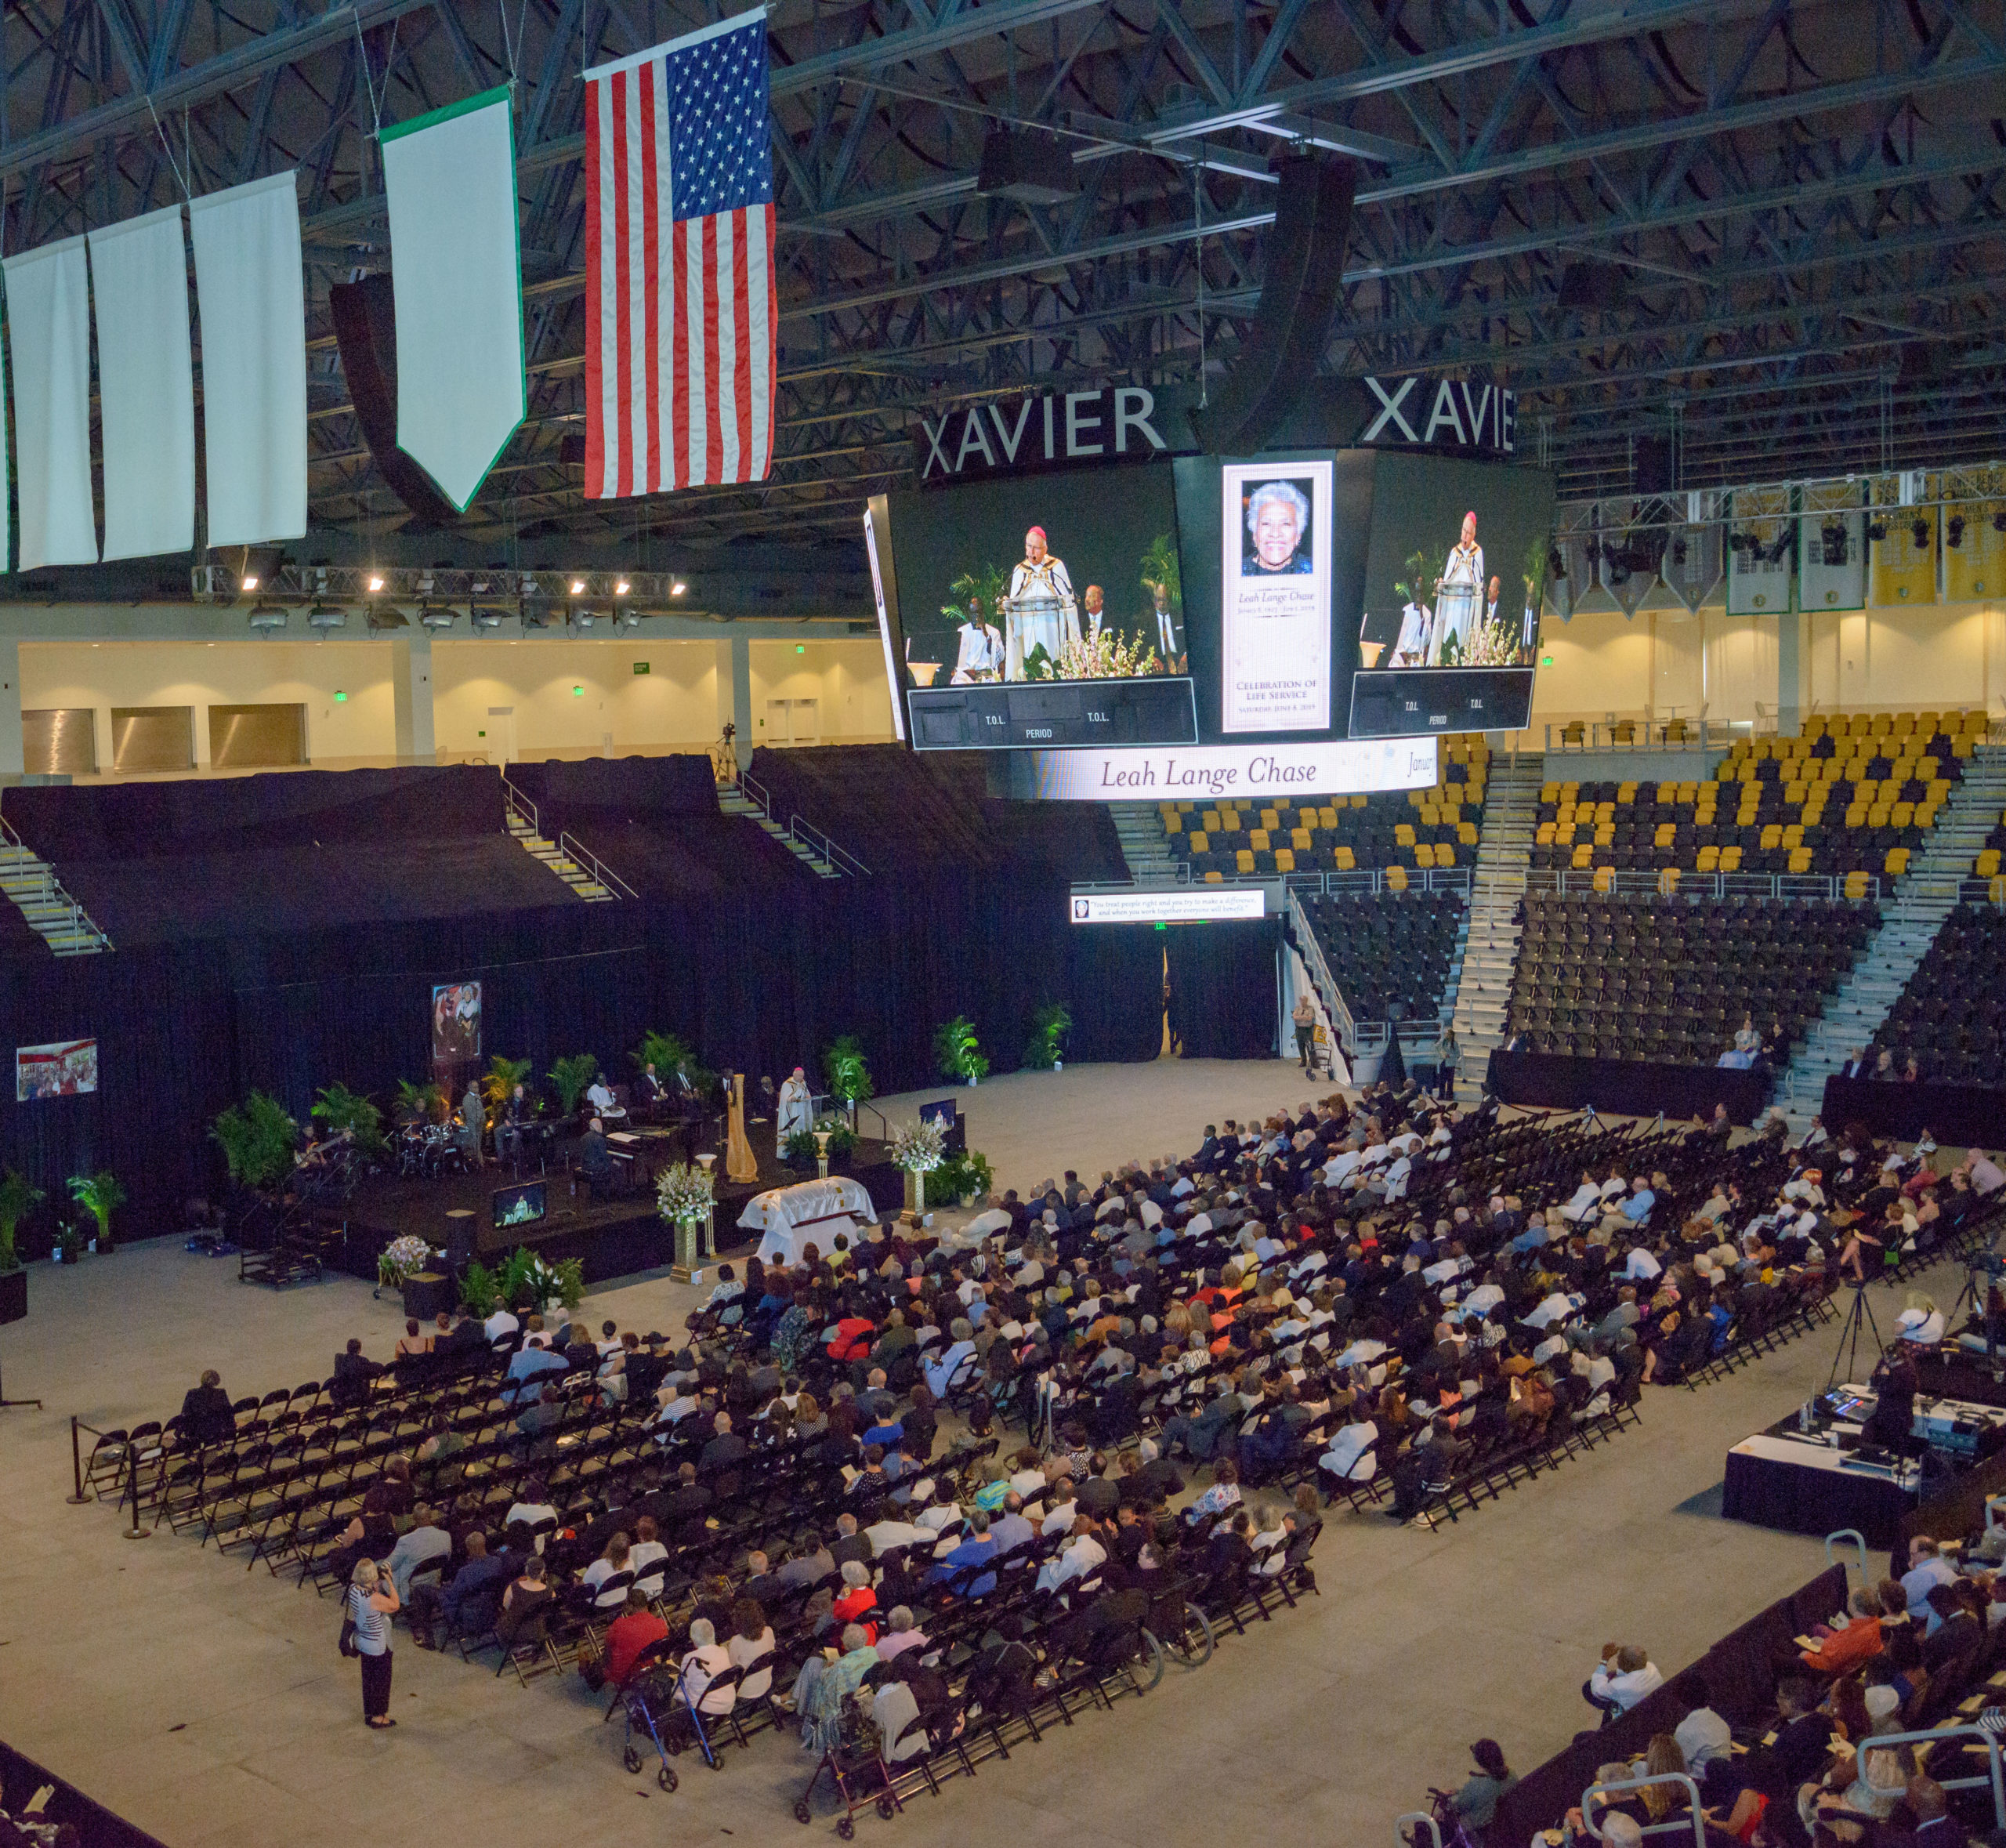 New Orleans Archbishop Gregory Aymond speaks by the casket of Chef Leah Chase during Celebration of Life Service at the Xavier University Convocation Center in New Orleans, La. Saturday, June 8, 2019. The Queen of Creole Cuisine at Dooky Chase's Restaurant passed away last Saturday June 1st at the age of 96. She served two U.S. presidents and also Freedom Riders during the Civil Rights area and the restaurant she ran with her husband, Dooky Chase, Jr., served as a meeting place for African-American politicians for decades. Photo by Matthew Hinton